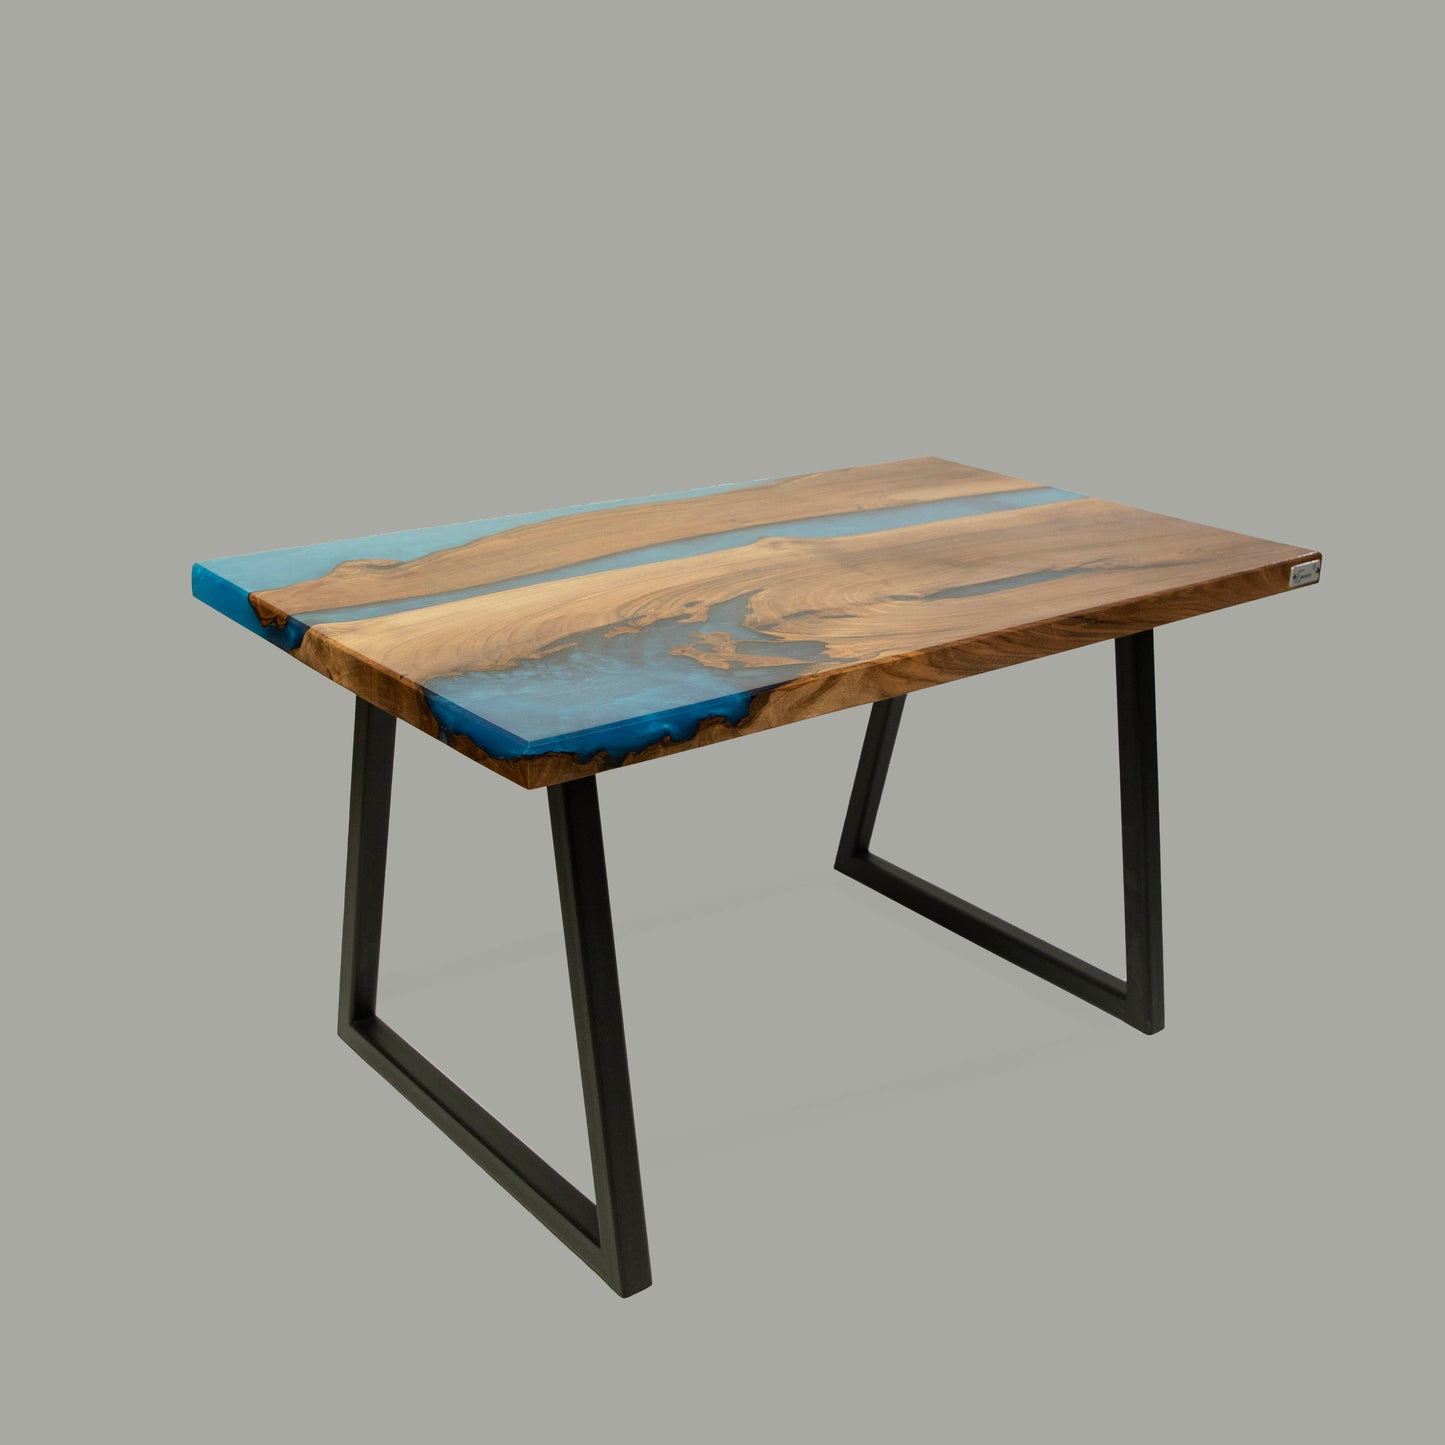 Coffee table made from wood and epoxy resin in the color classic blue